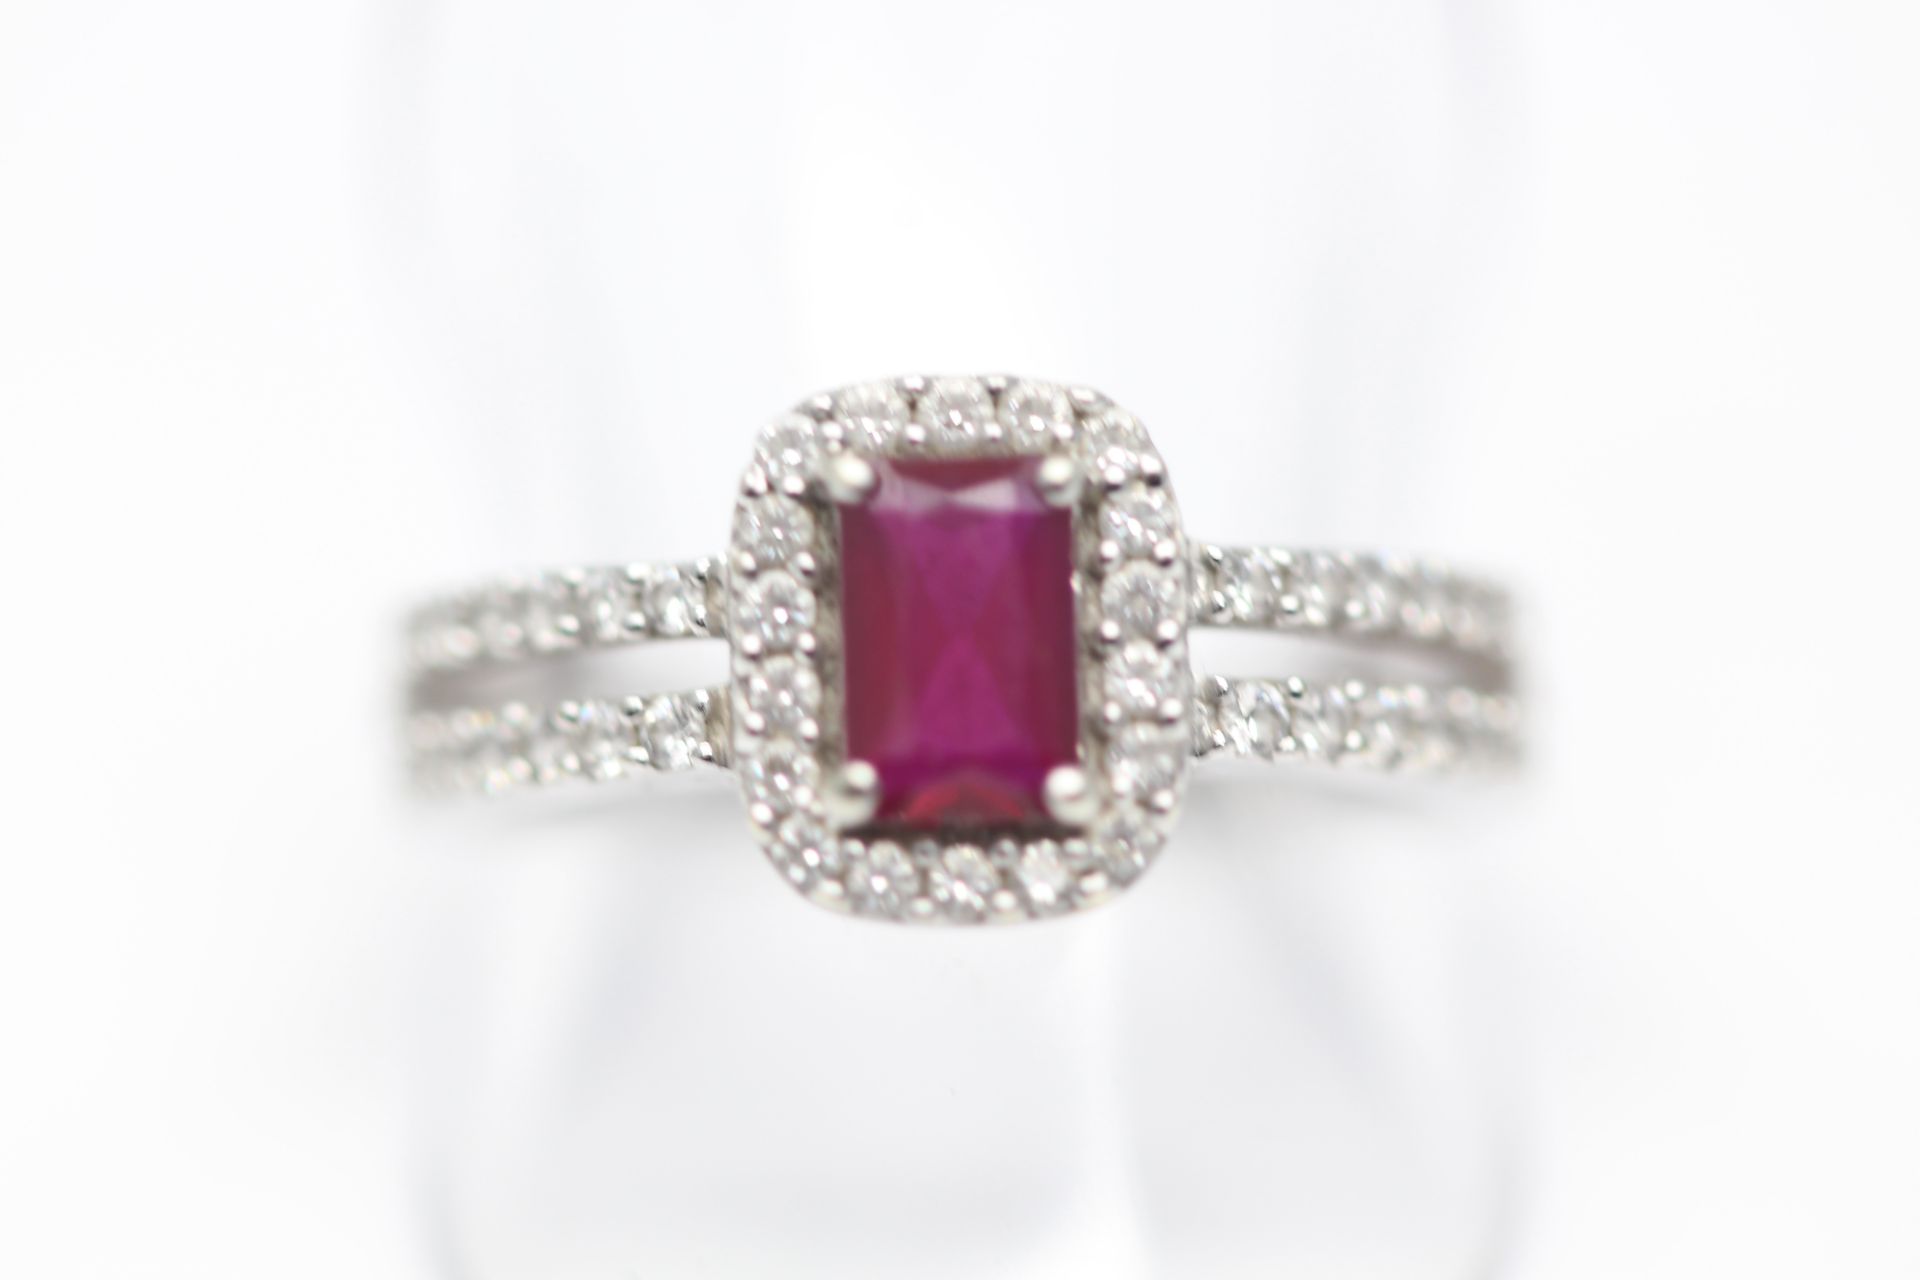 SOLID WHITE GOLD LADIES RING SET WITH A SINGLE EMERALD CUT NATURAL RED RUBY WITH DIAMONDS (PV-JH)